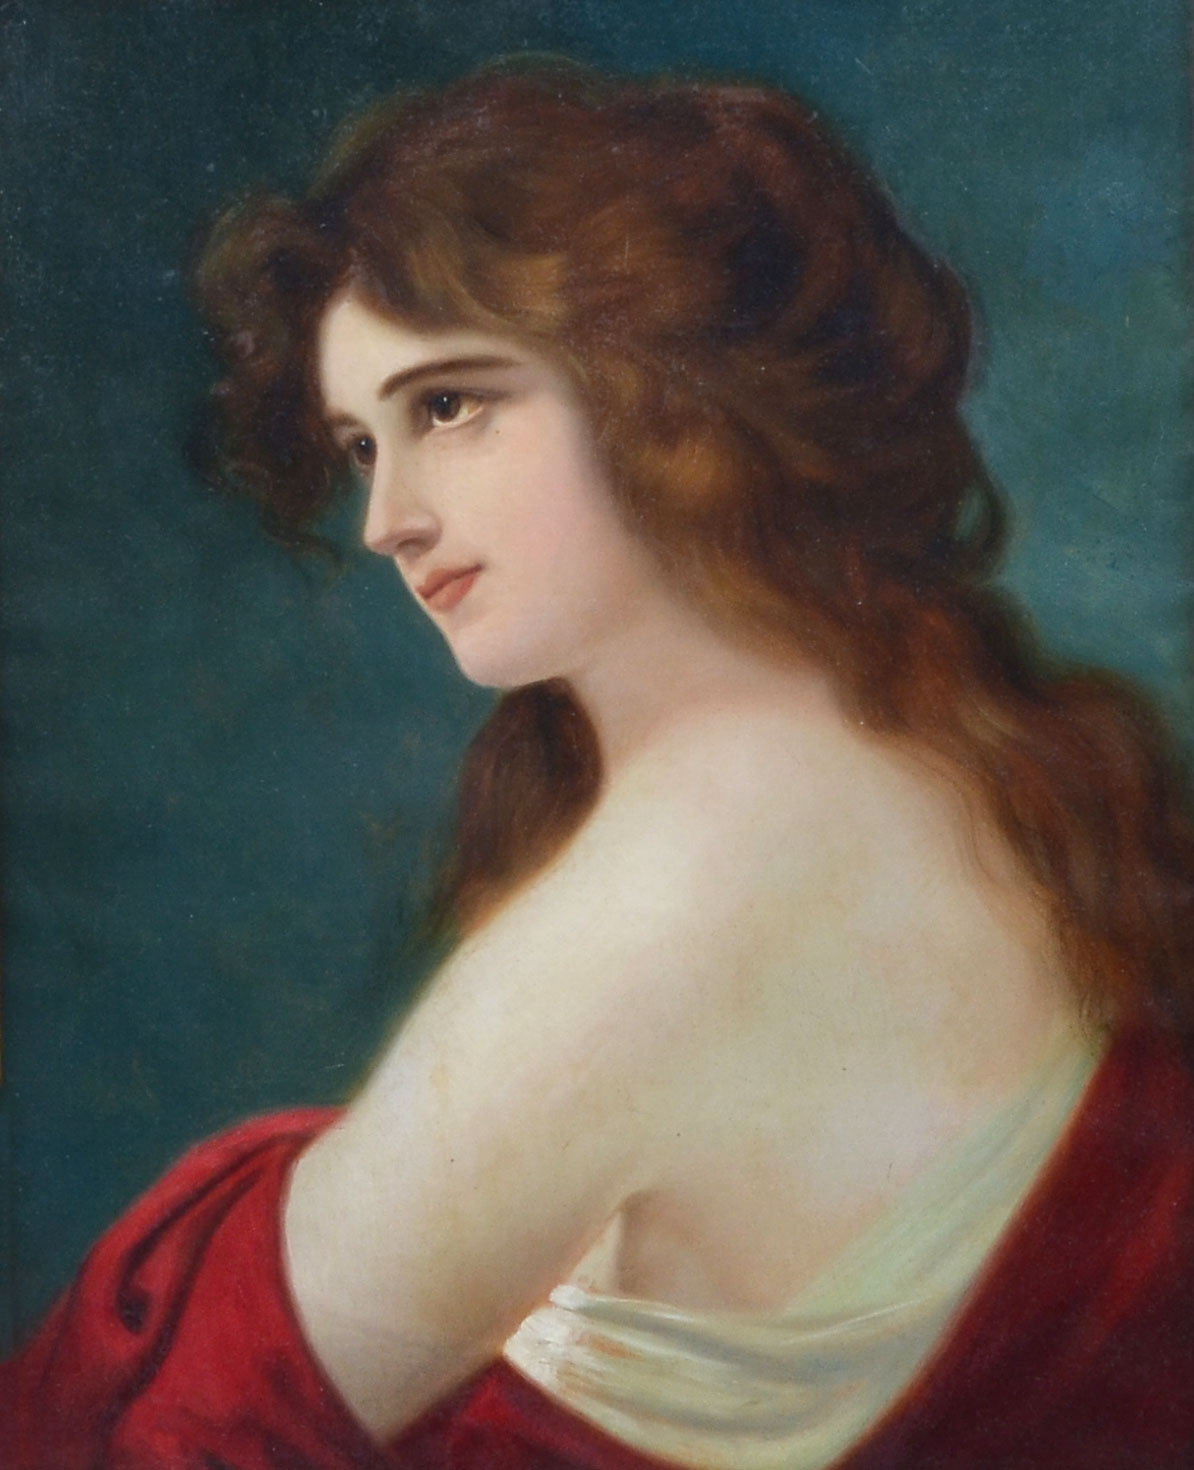 19TH CENTURY PAINTING OF A YOUNG 36f8c9